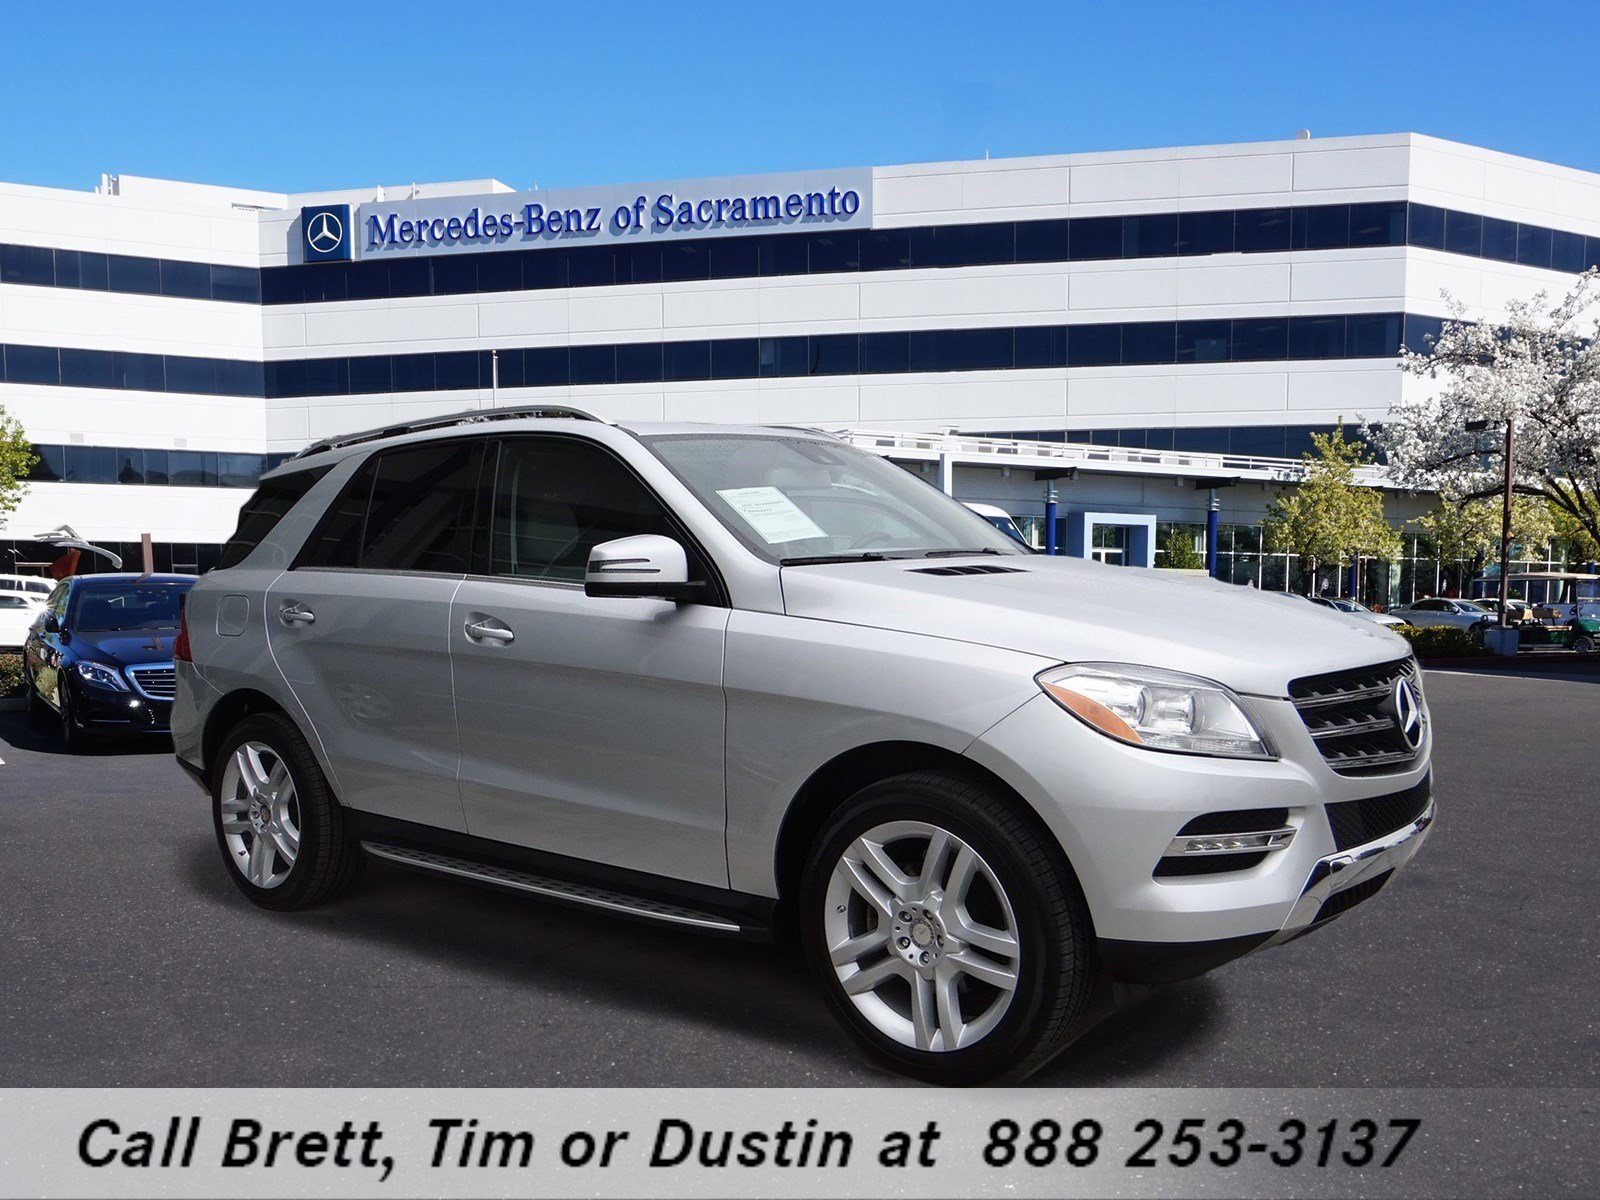 What are some ways to find a good pre-owned Mercedes ML350?